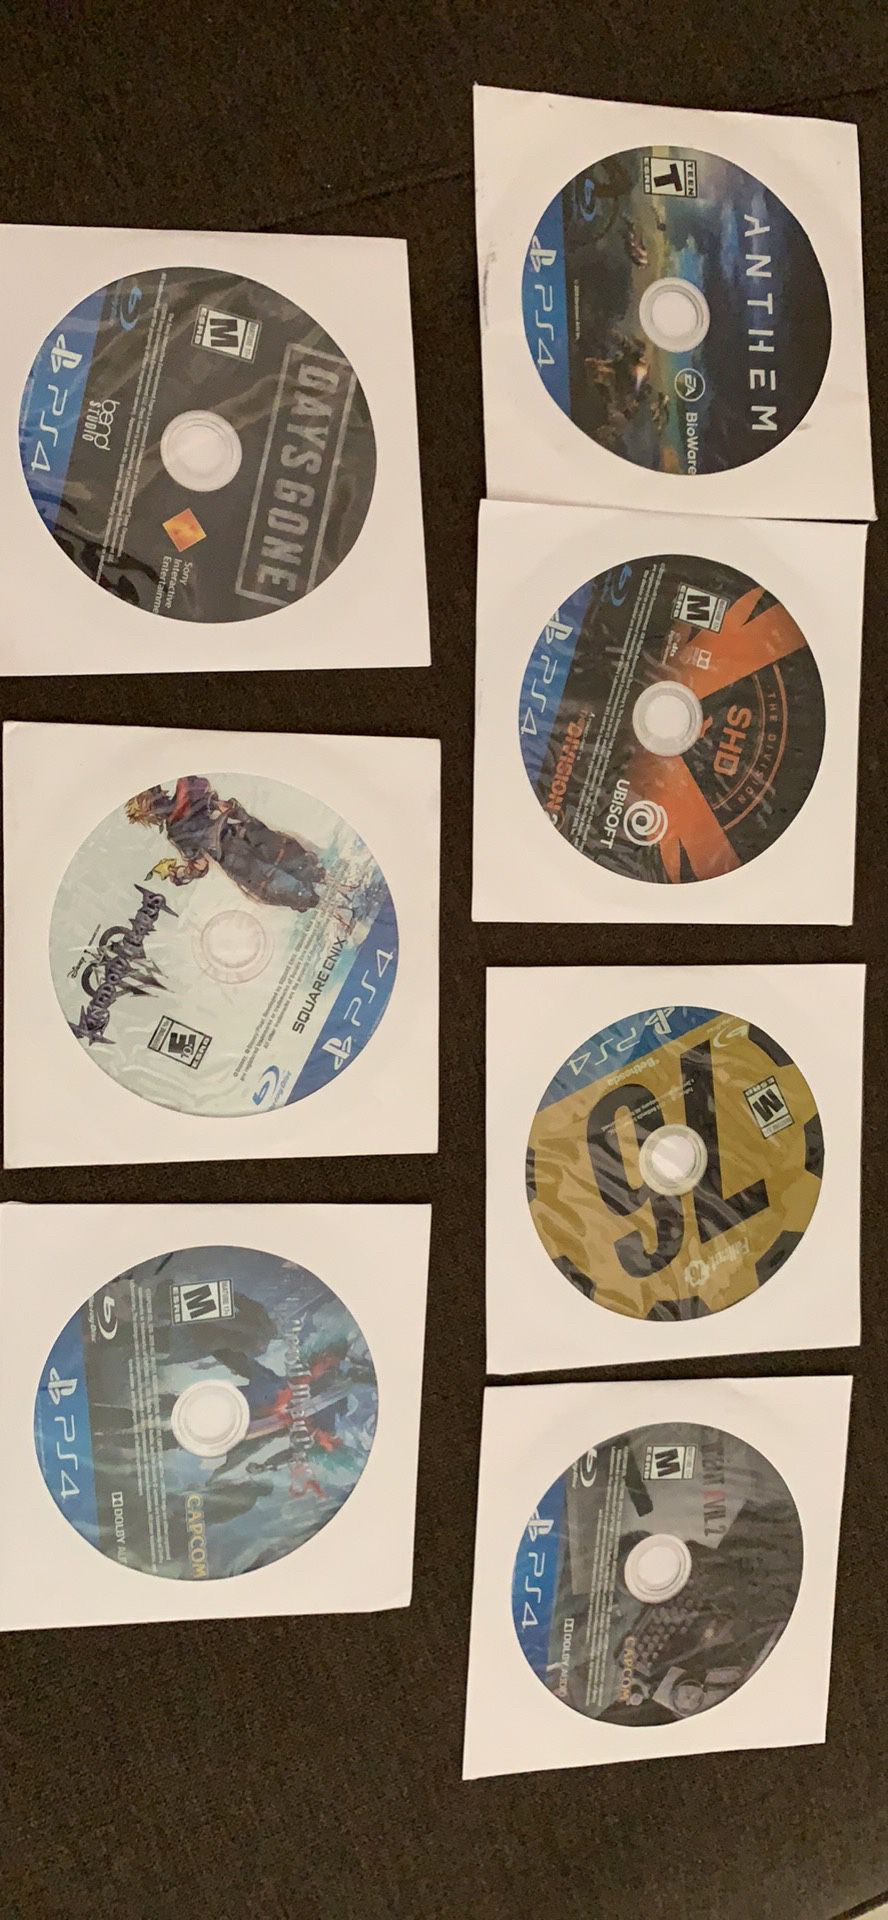 PS4 Games!!! Days Gone, Kingdom Hearts III, DMC5, Anthem, Division 2, FALLOUT 76, Resident Evil 2